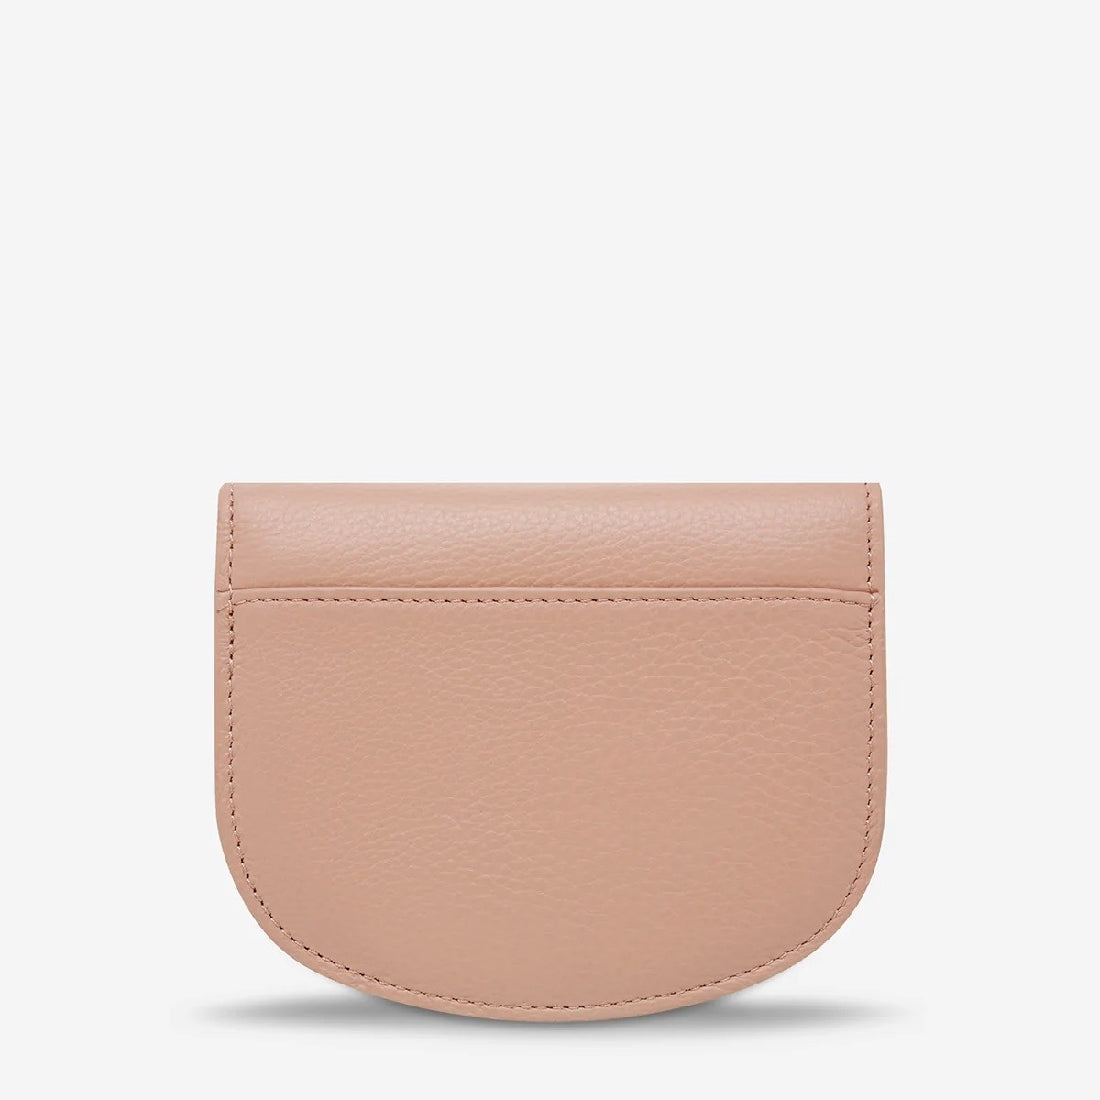 Status Anxiety Us For Now Coin Purse - Little Extras Lifestyle Boutique